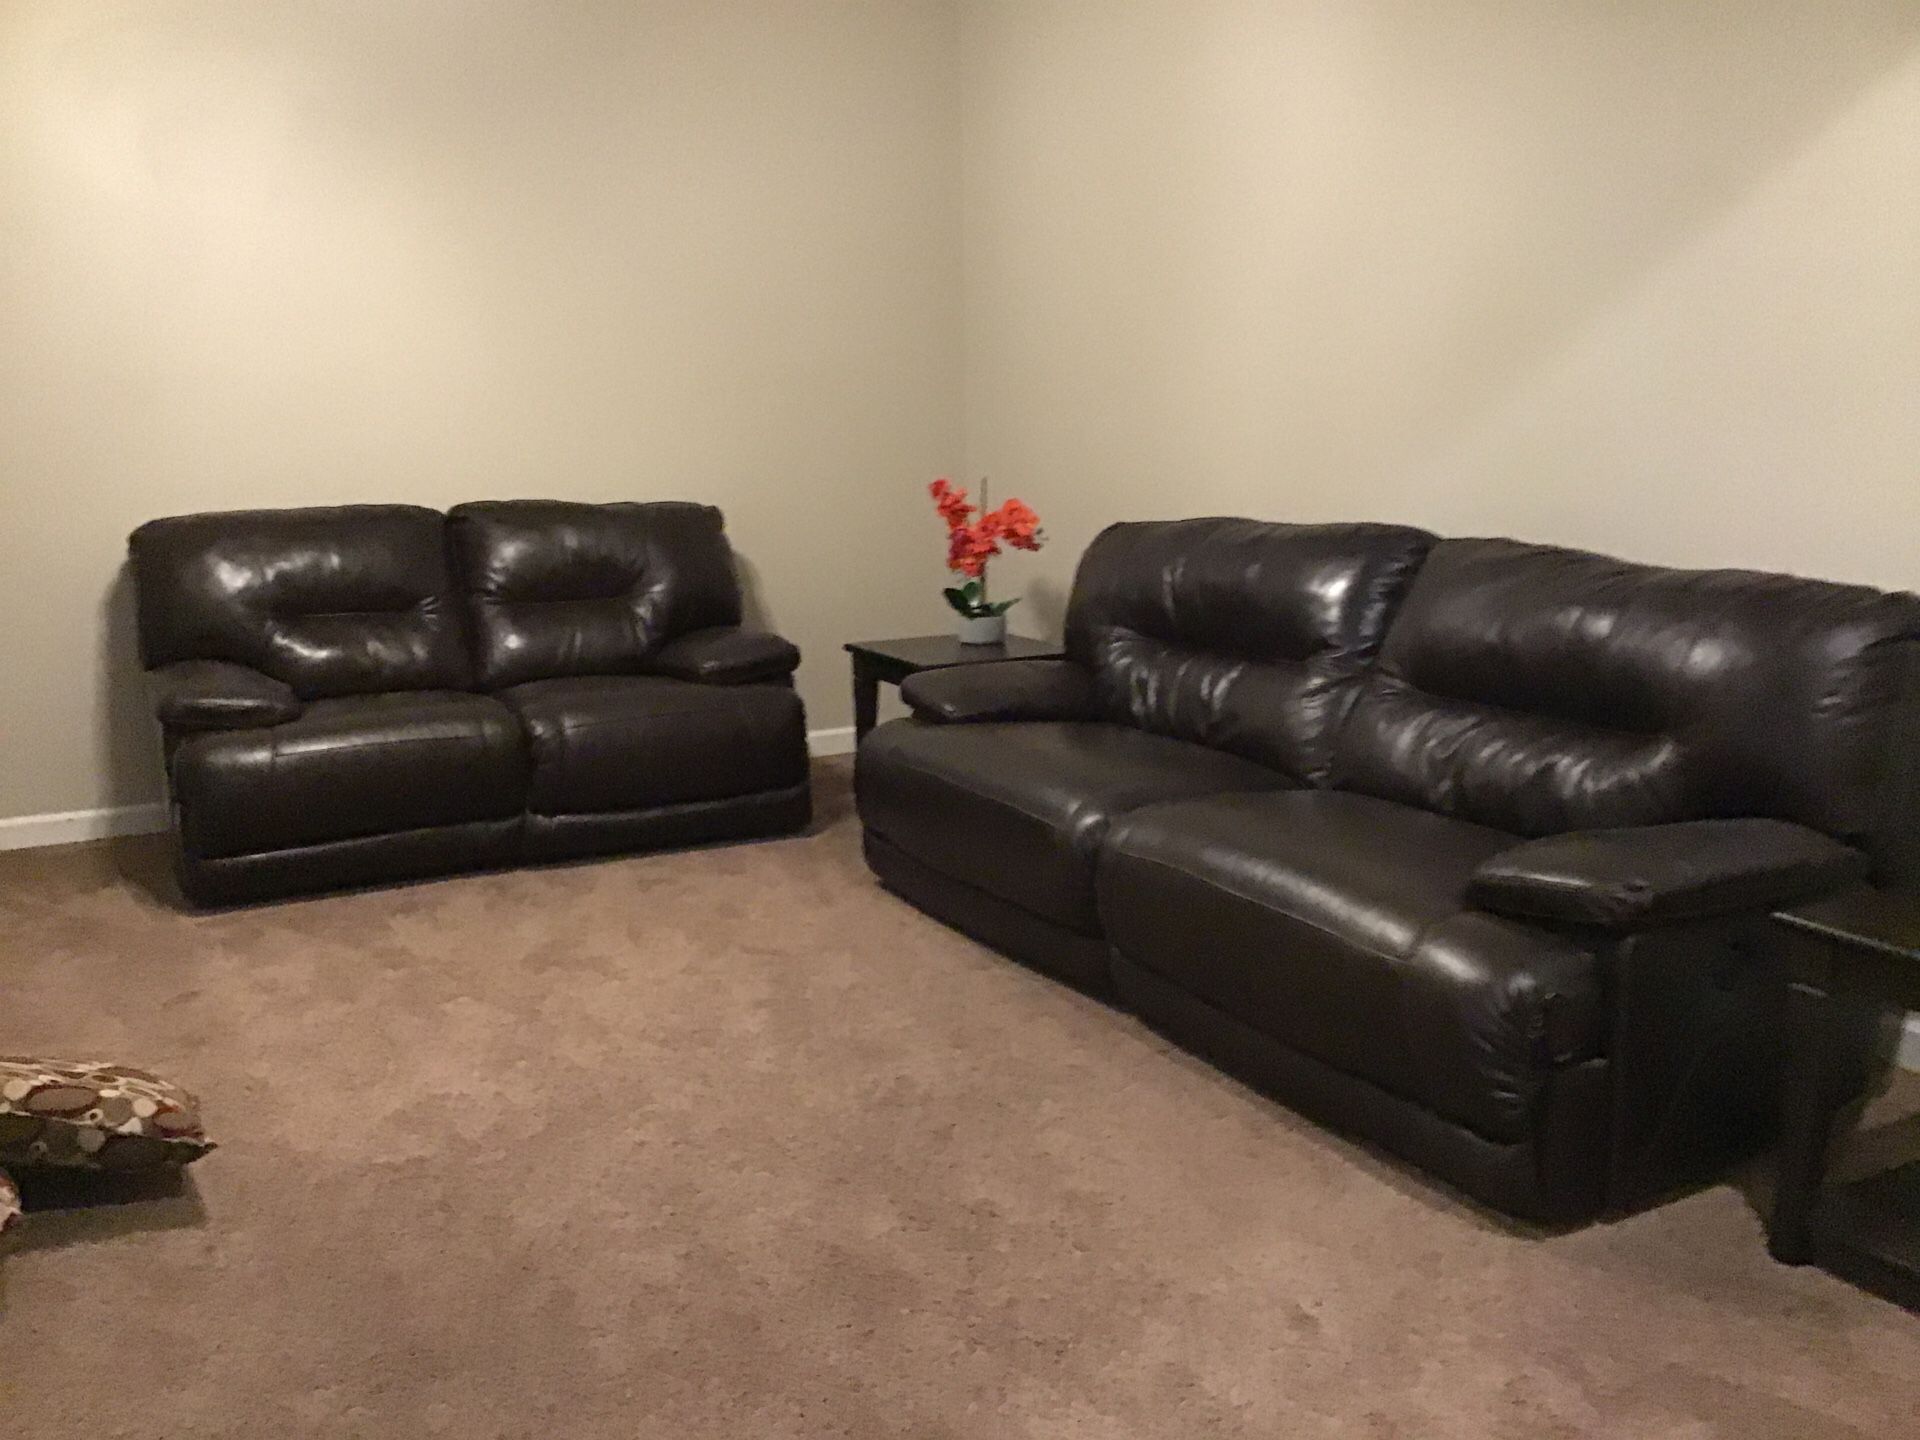 Leather Couch and Loveseat Set, Like New - Rarely Used, Electric Recliners for both